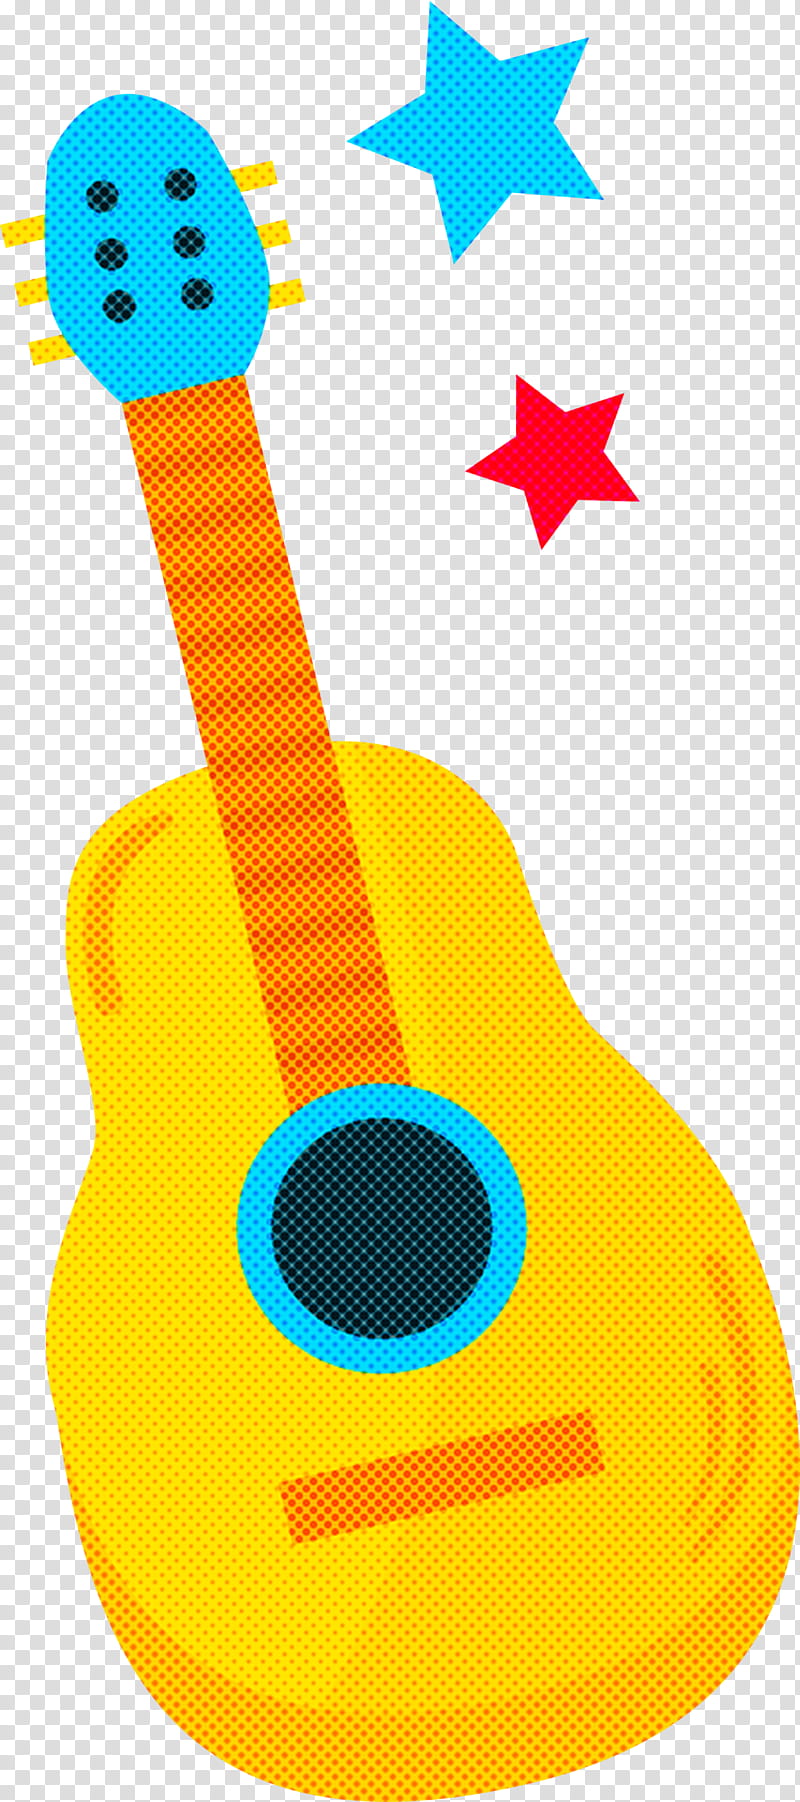 Guitar, Yellow, Musical Instrument, String Instrument, Ukulele, Plucked String Instruments, Symbol transparent background PNG clipart